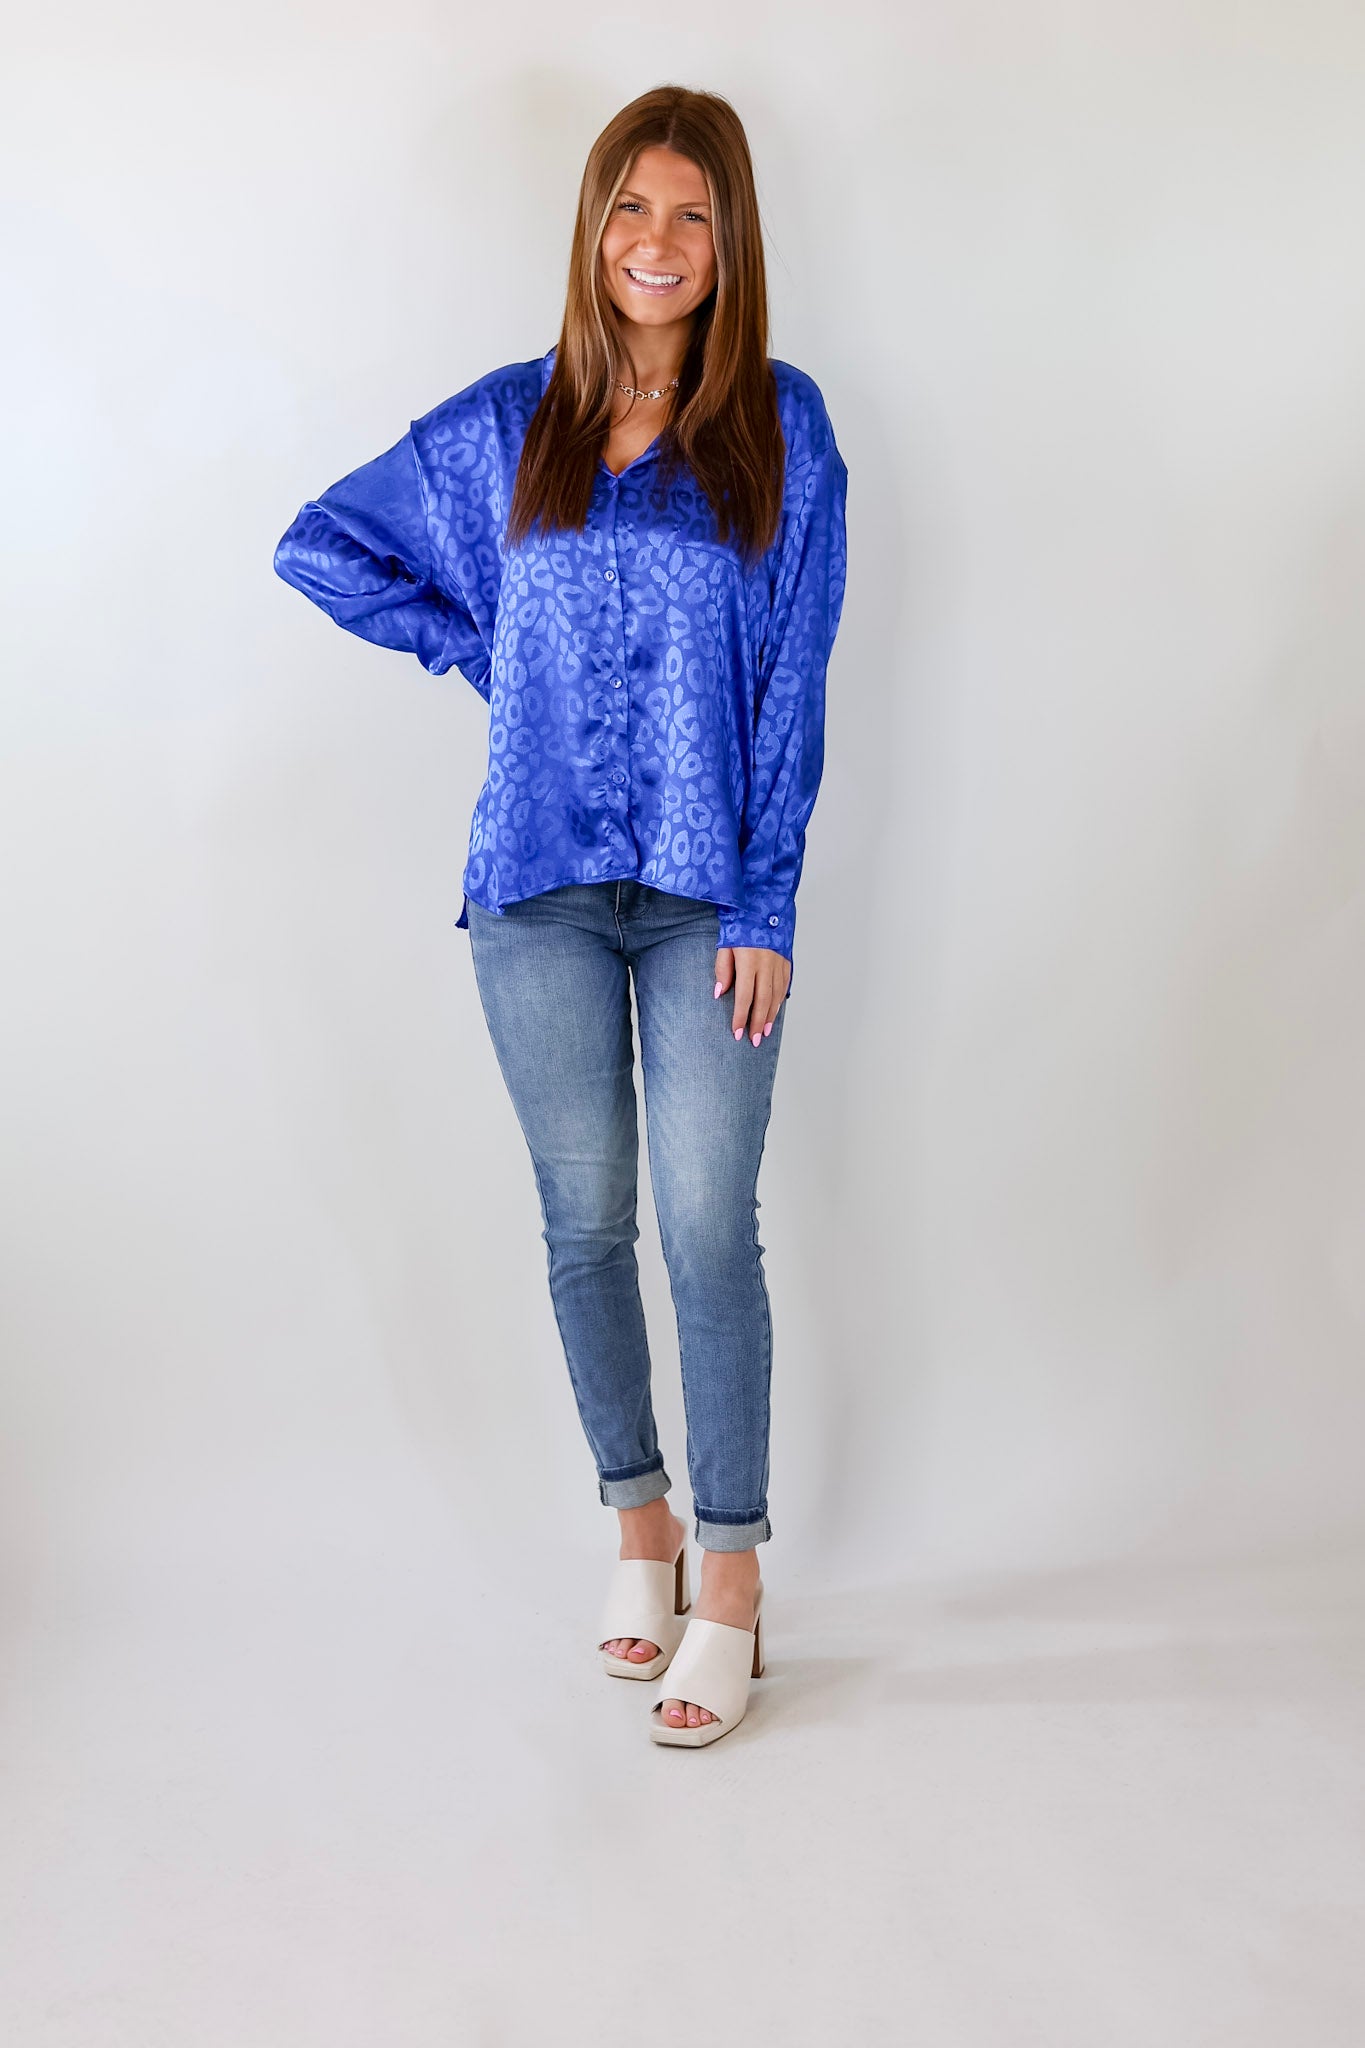 Top It Off Long Sleeve Button Up Satin Leopard Top in Blue - Giddy Up Glamour Boutique